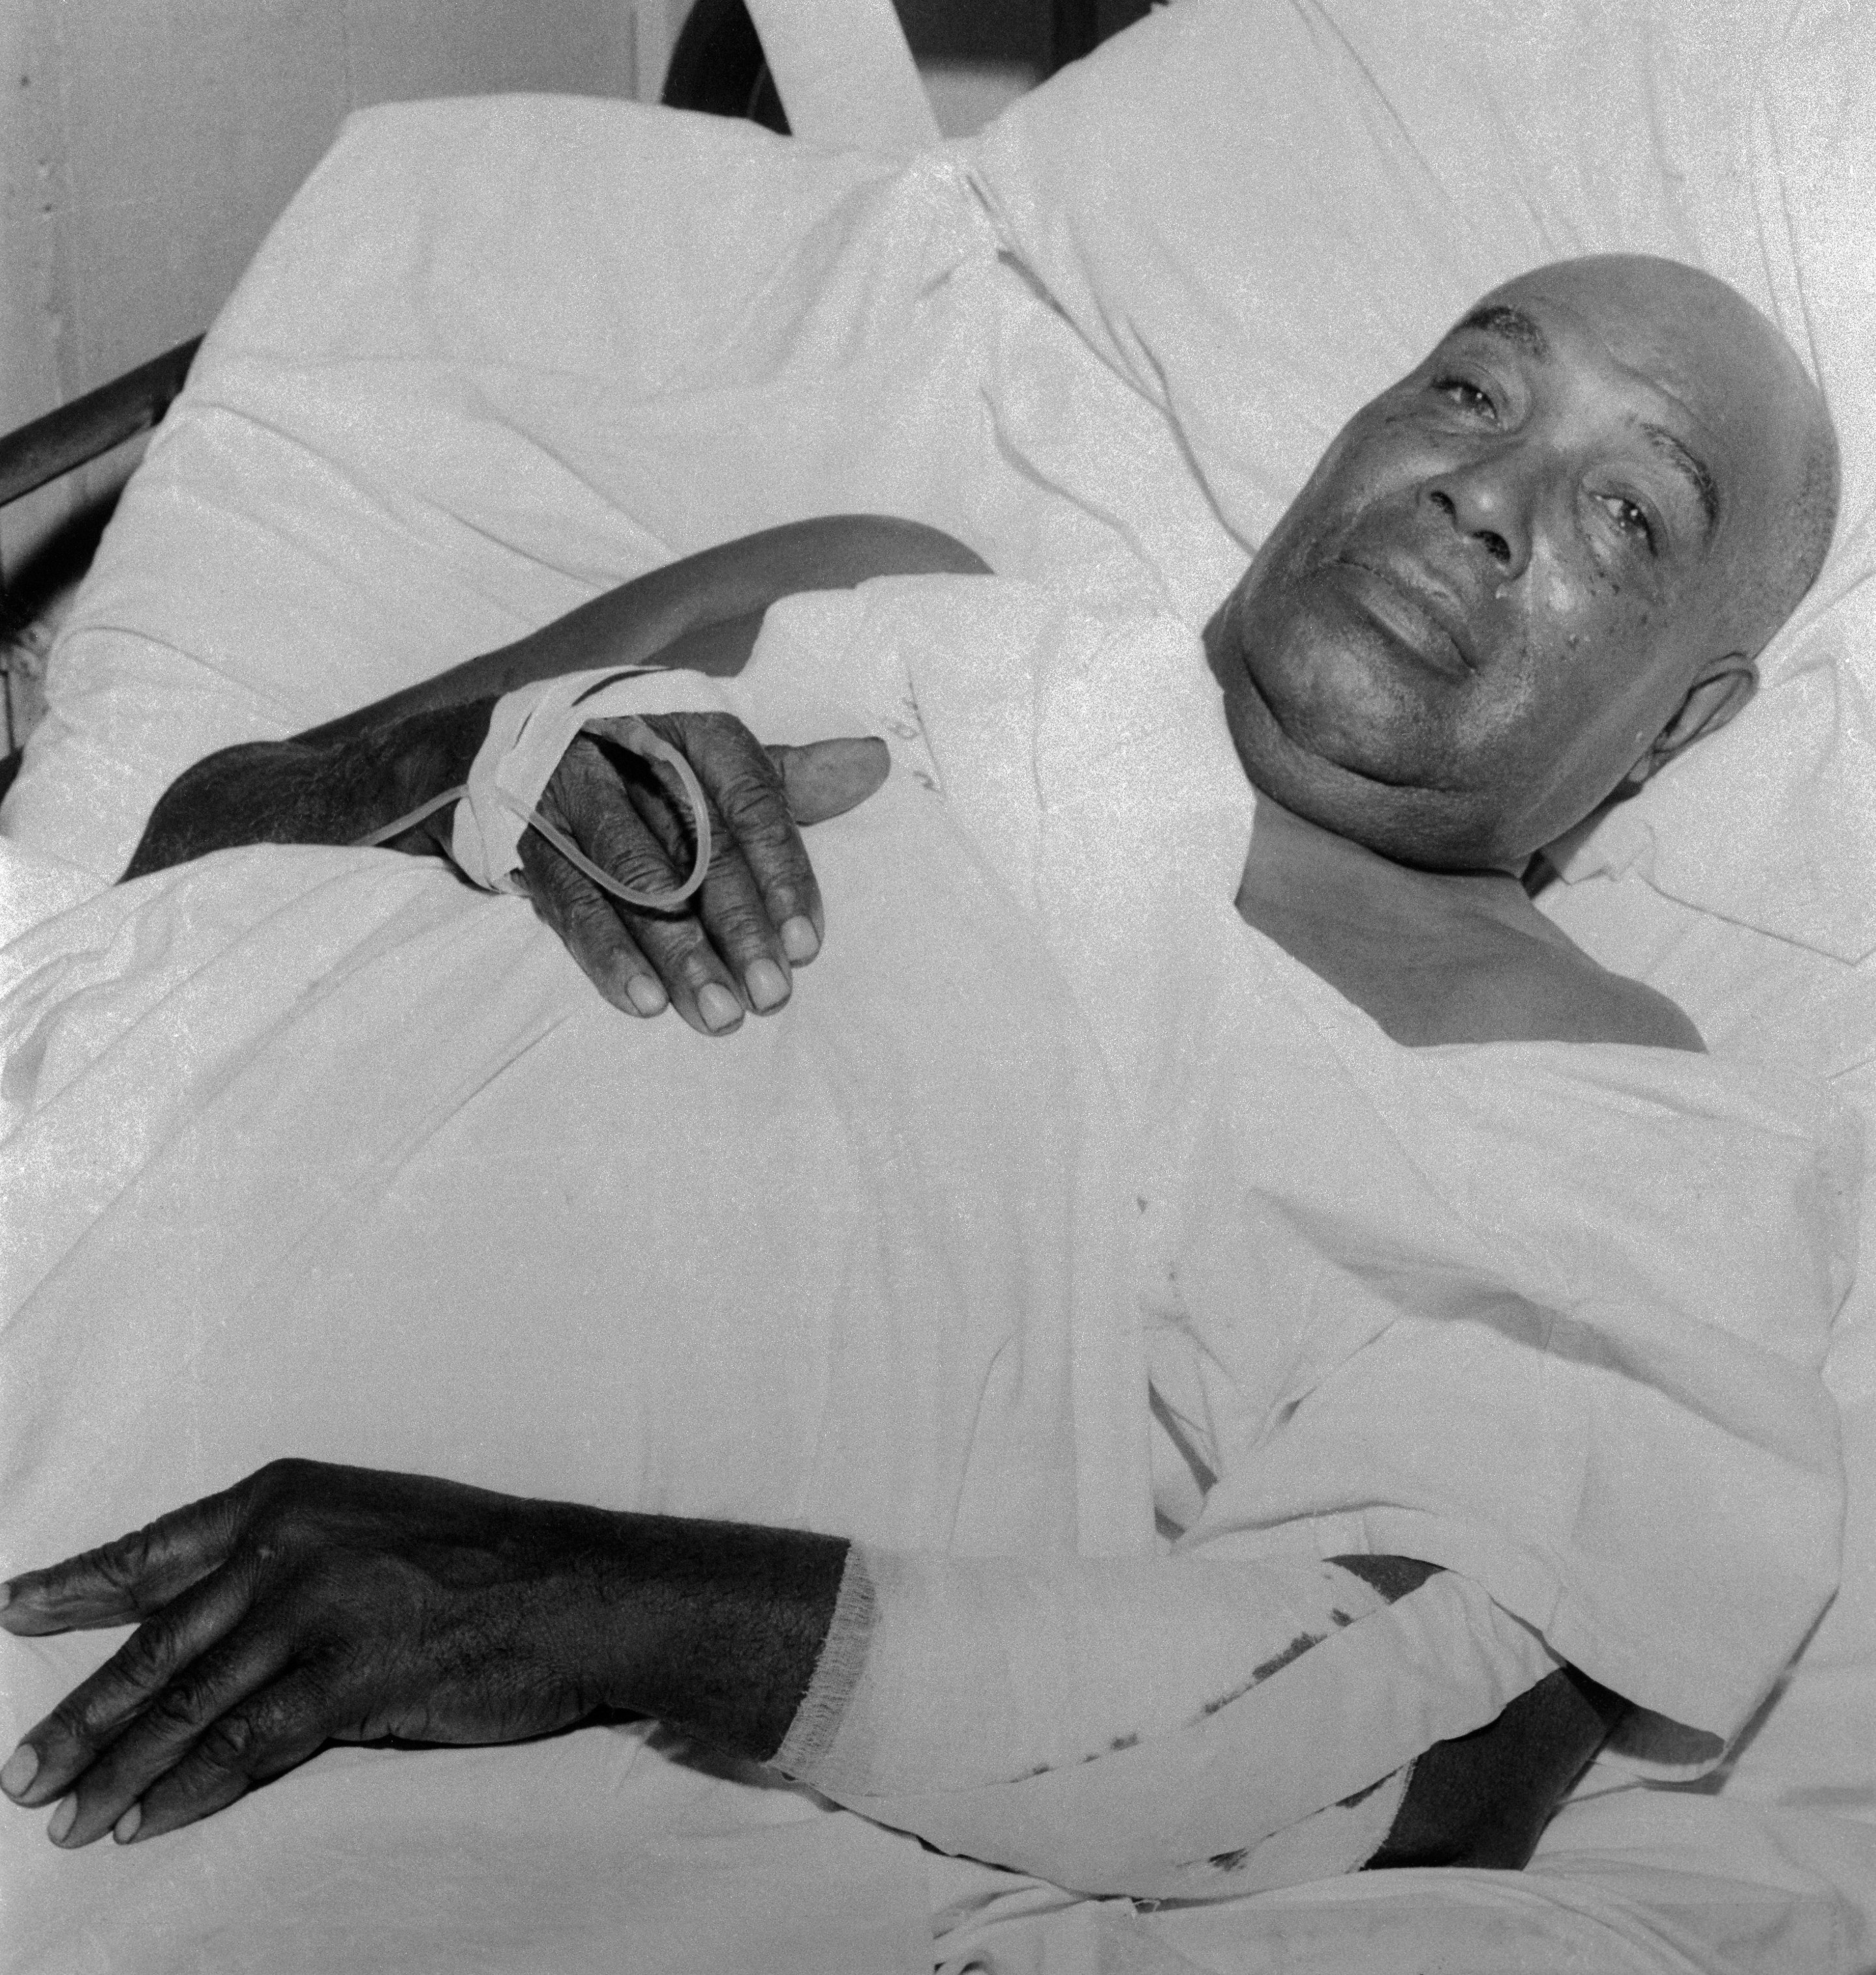 Gus courts in hospital bed